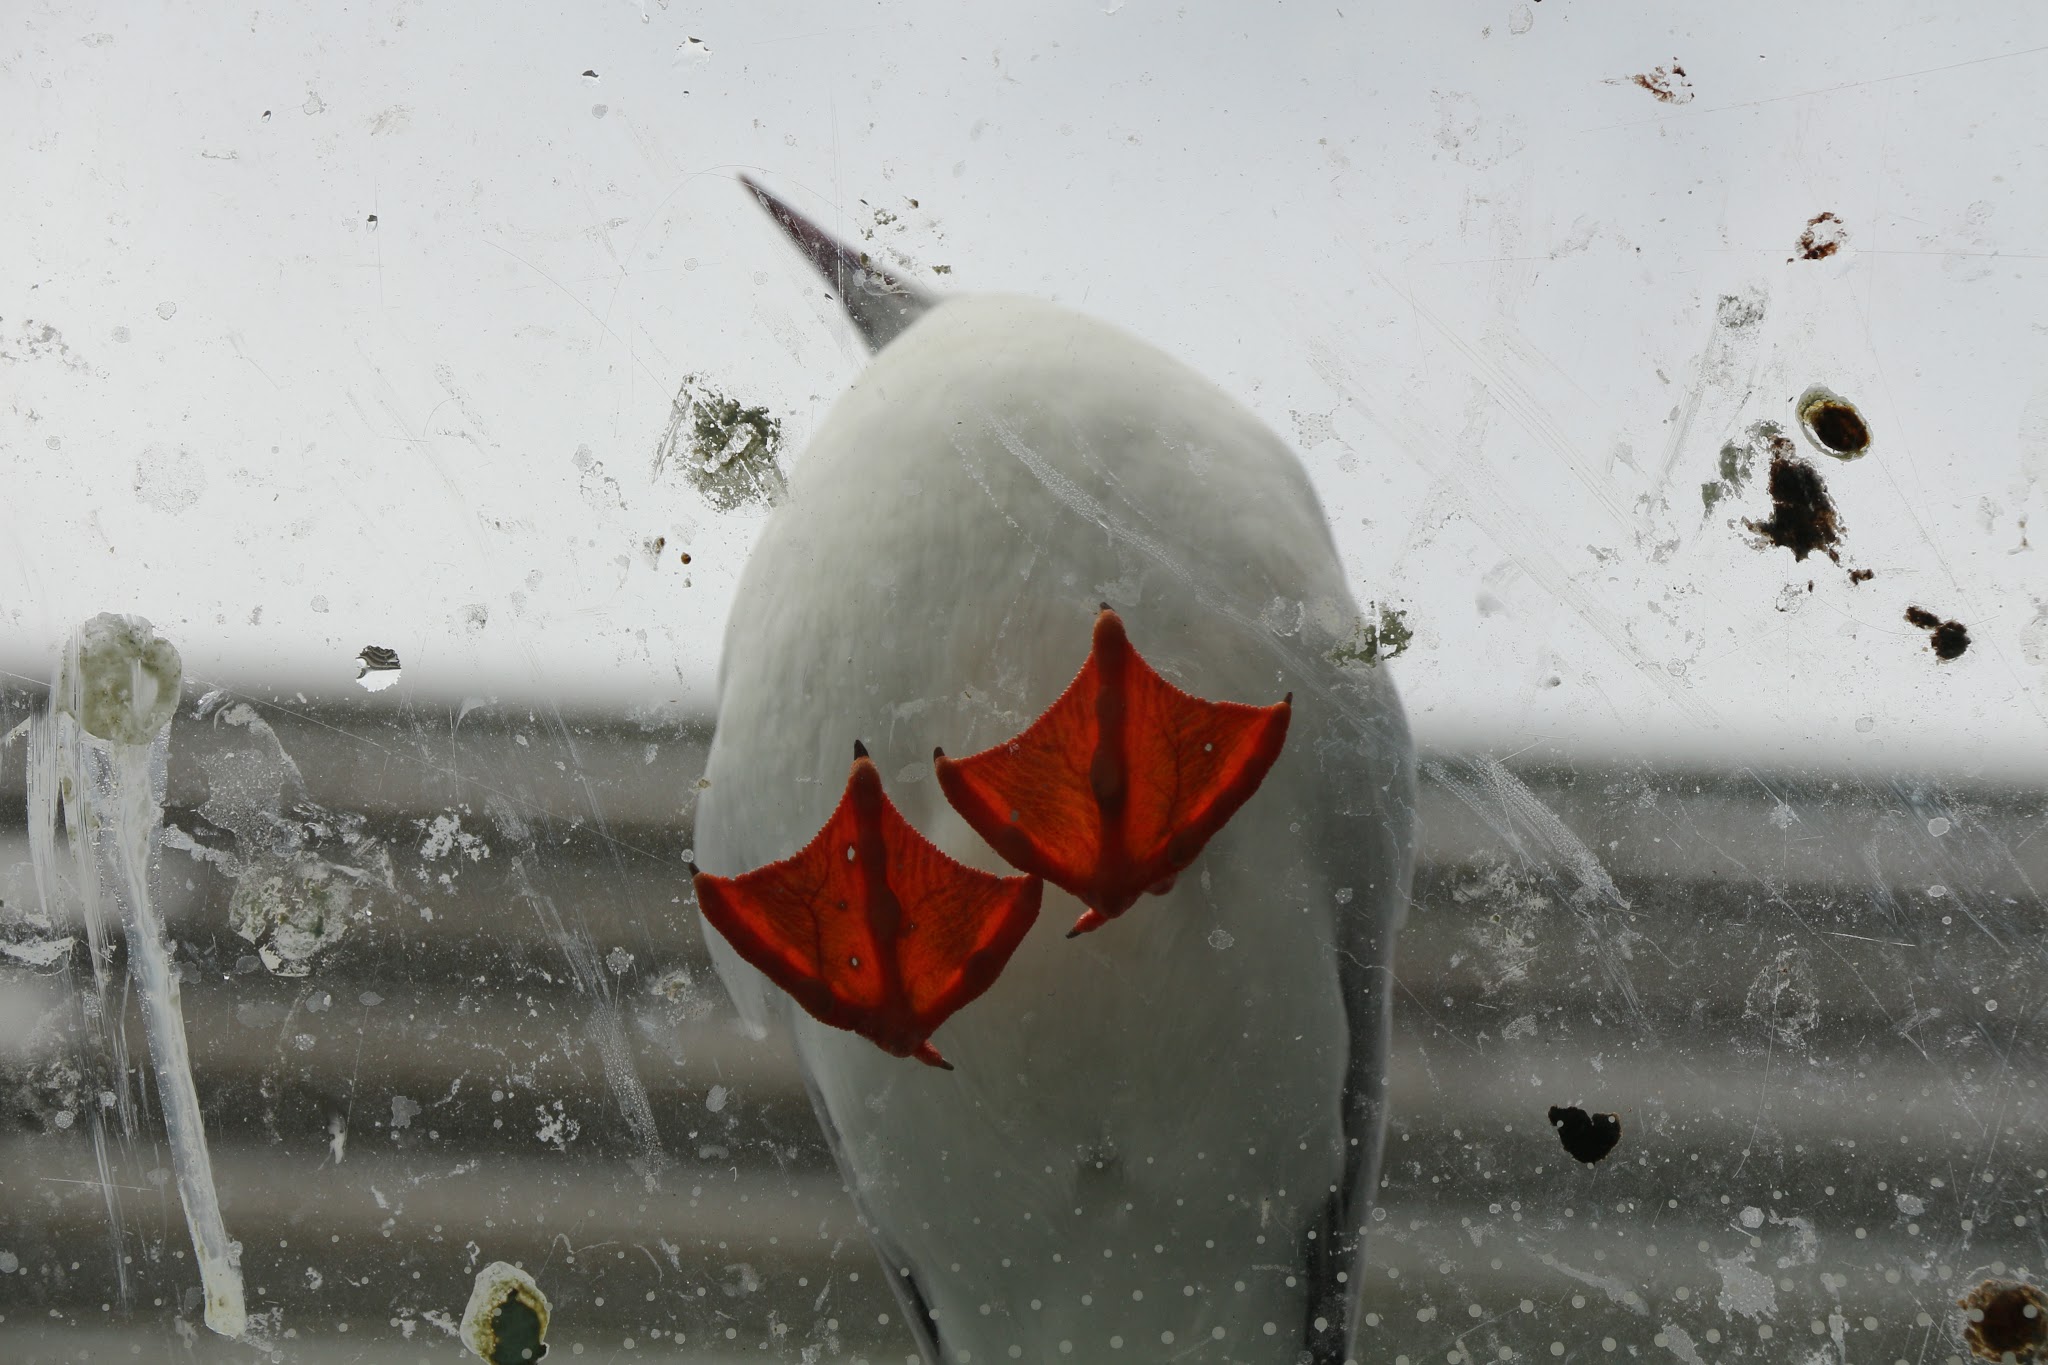 A view of a glass roof from below. A gull of some kind is perched on the roof but it is hard to identify with only the undersides of its webbed orange feet. The glass roof is spattered with bird excrement that looks vaguely green and white.
